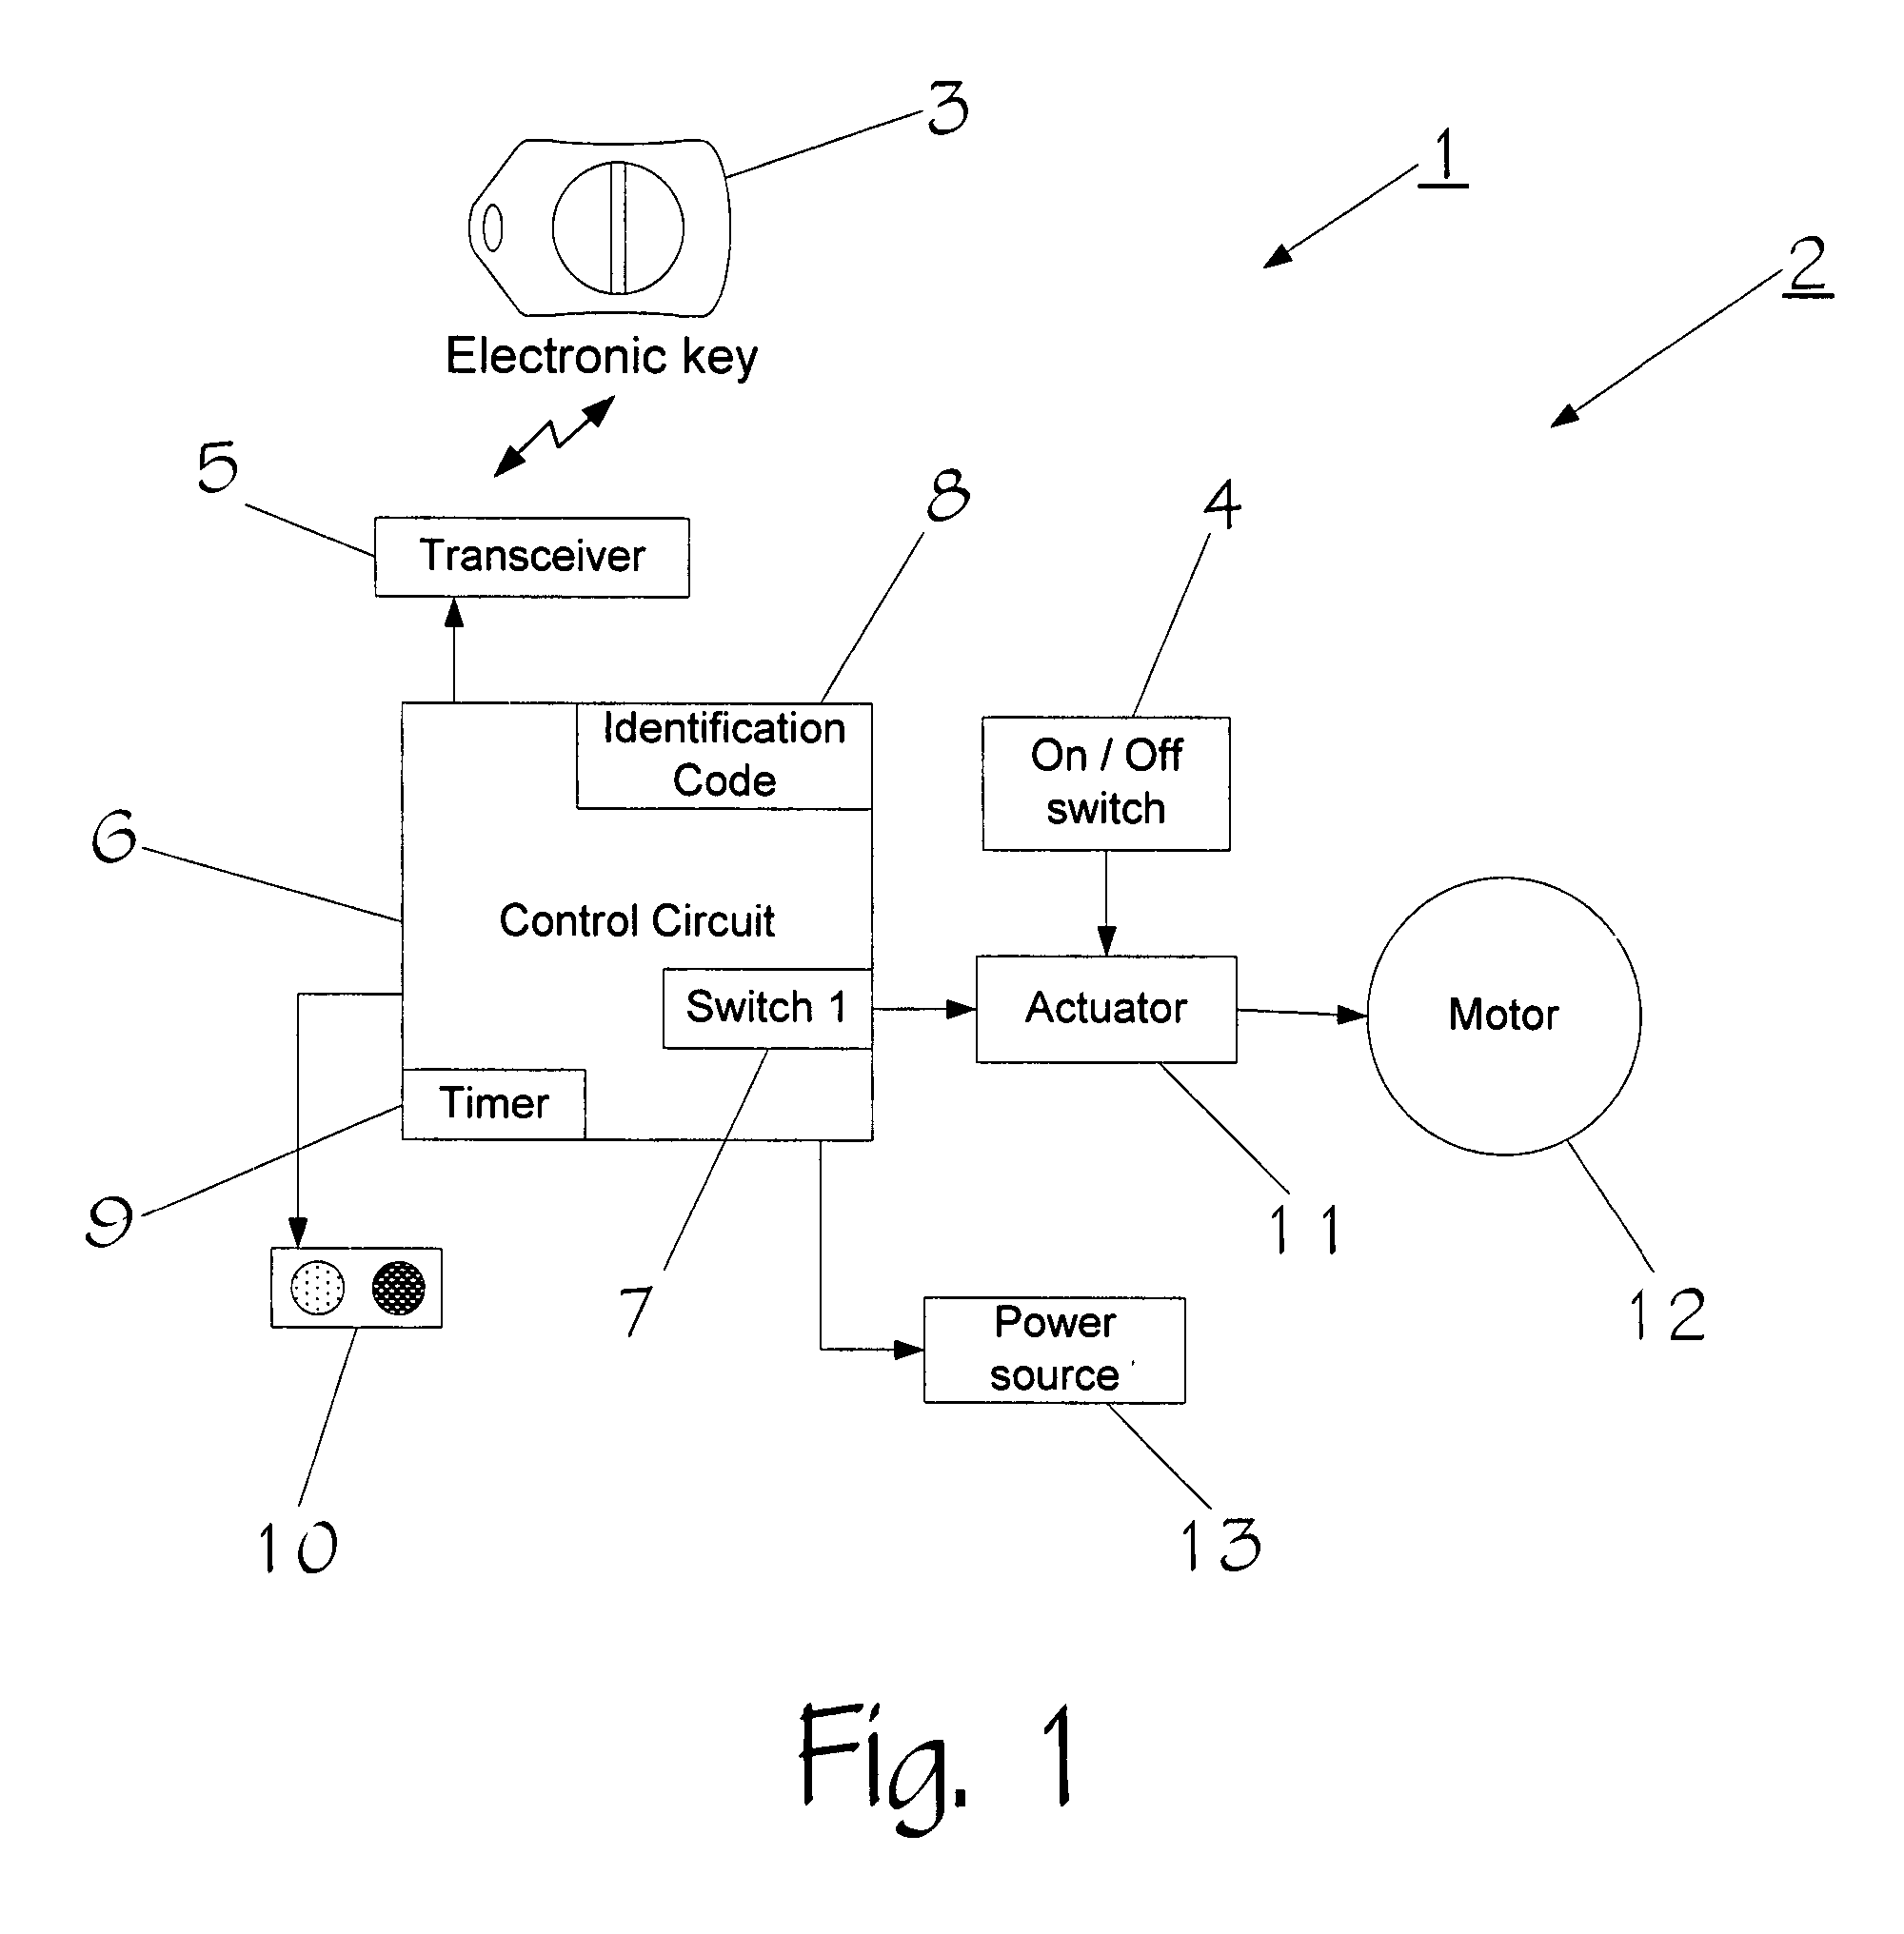 Electronically enabling device remotely